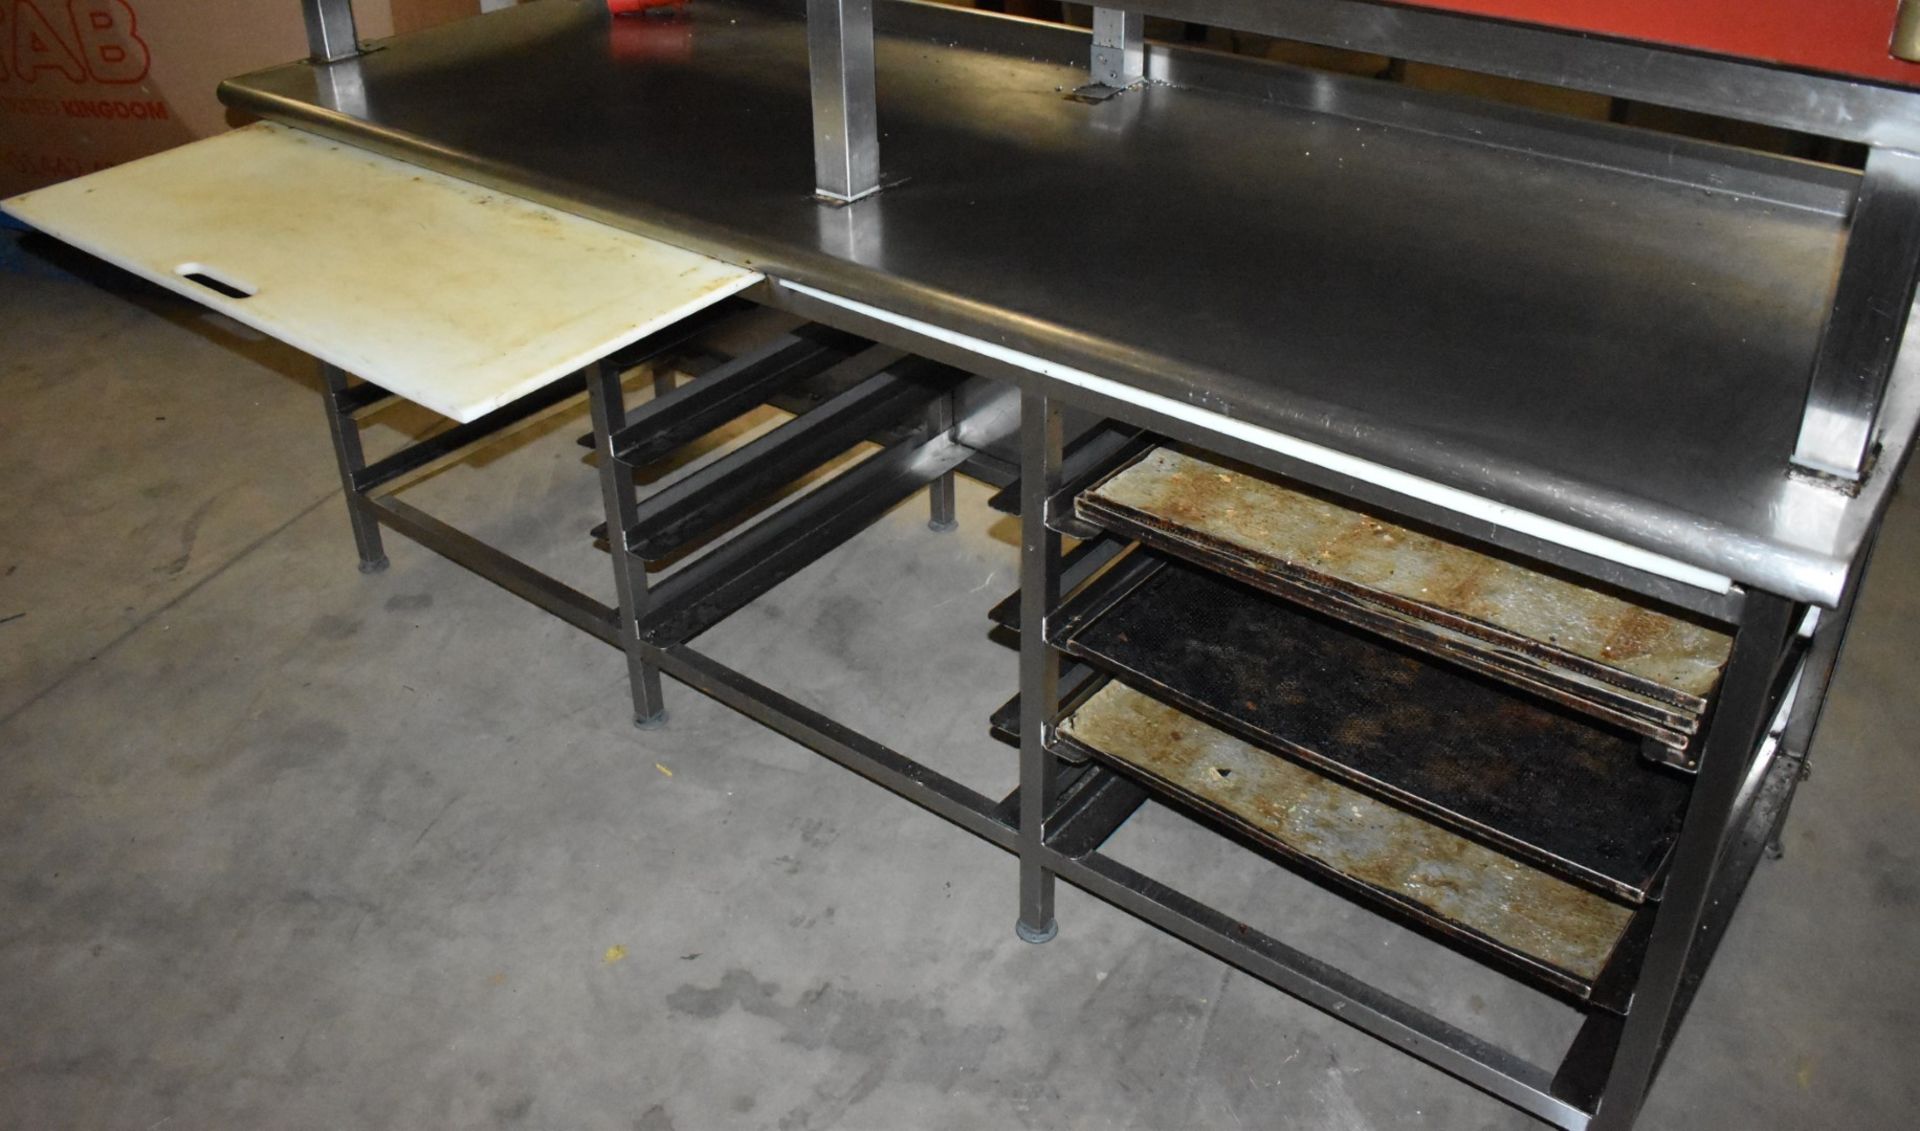 1 x Tom Chandley Double C5 60X40 Pie Oven With Stainless Steel Baking Tray Prep Bench - CL455 - - Image 11 of 18